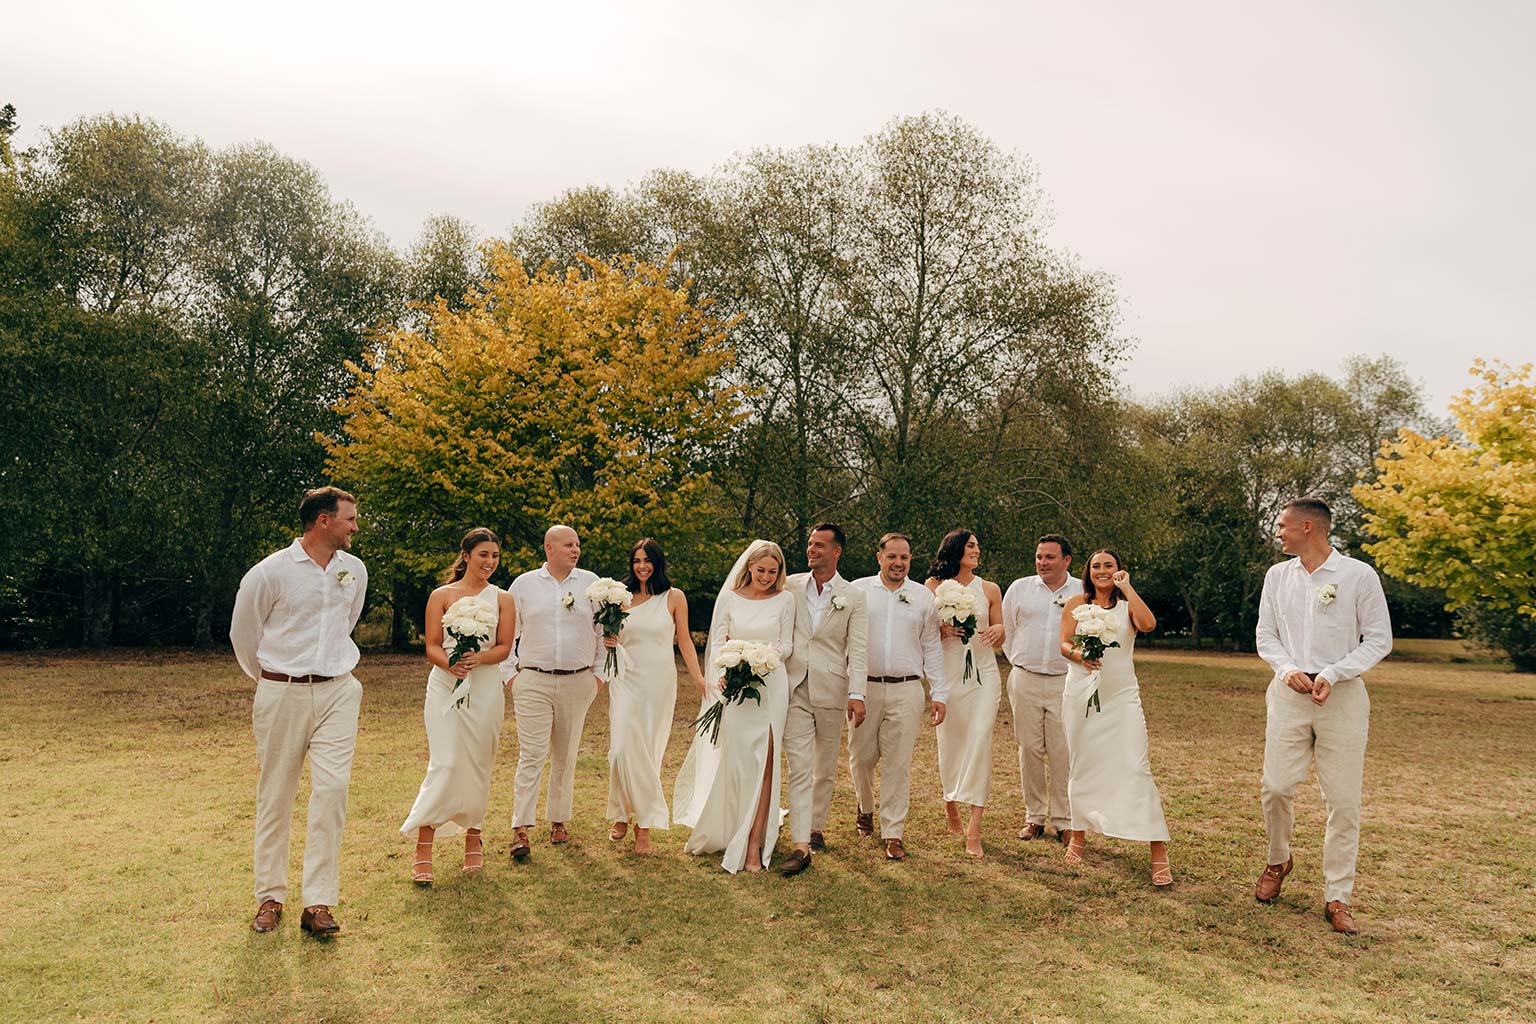 Vinka Design Bridal Wear features Real Wedding Matt and Emilia - bridal party gathered, bride wearing stunning bespoke Audrey gown from Modern Muse Collection